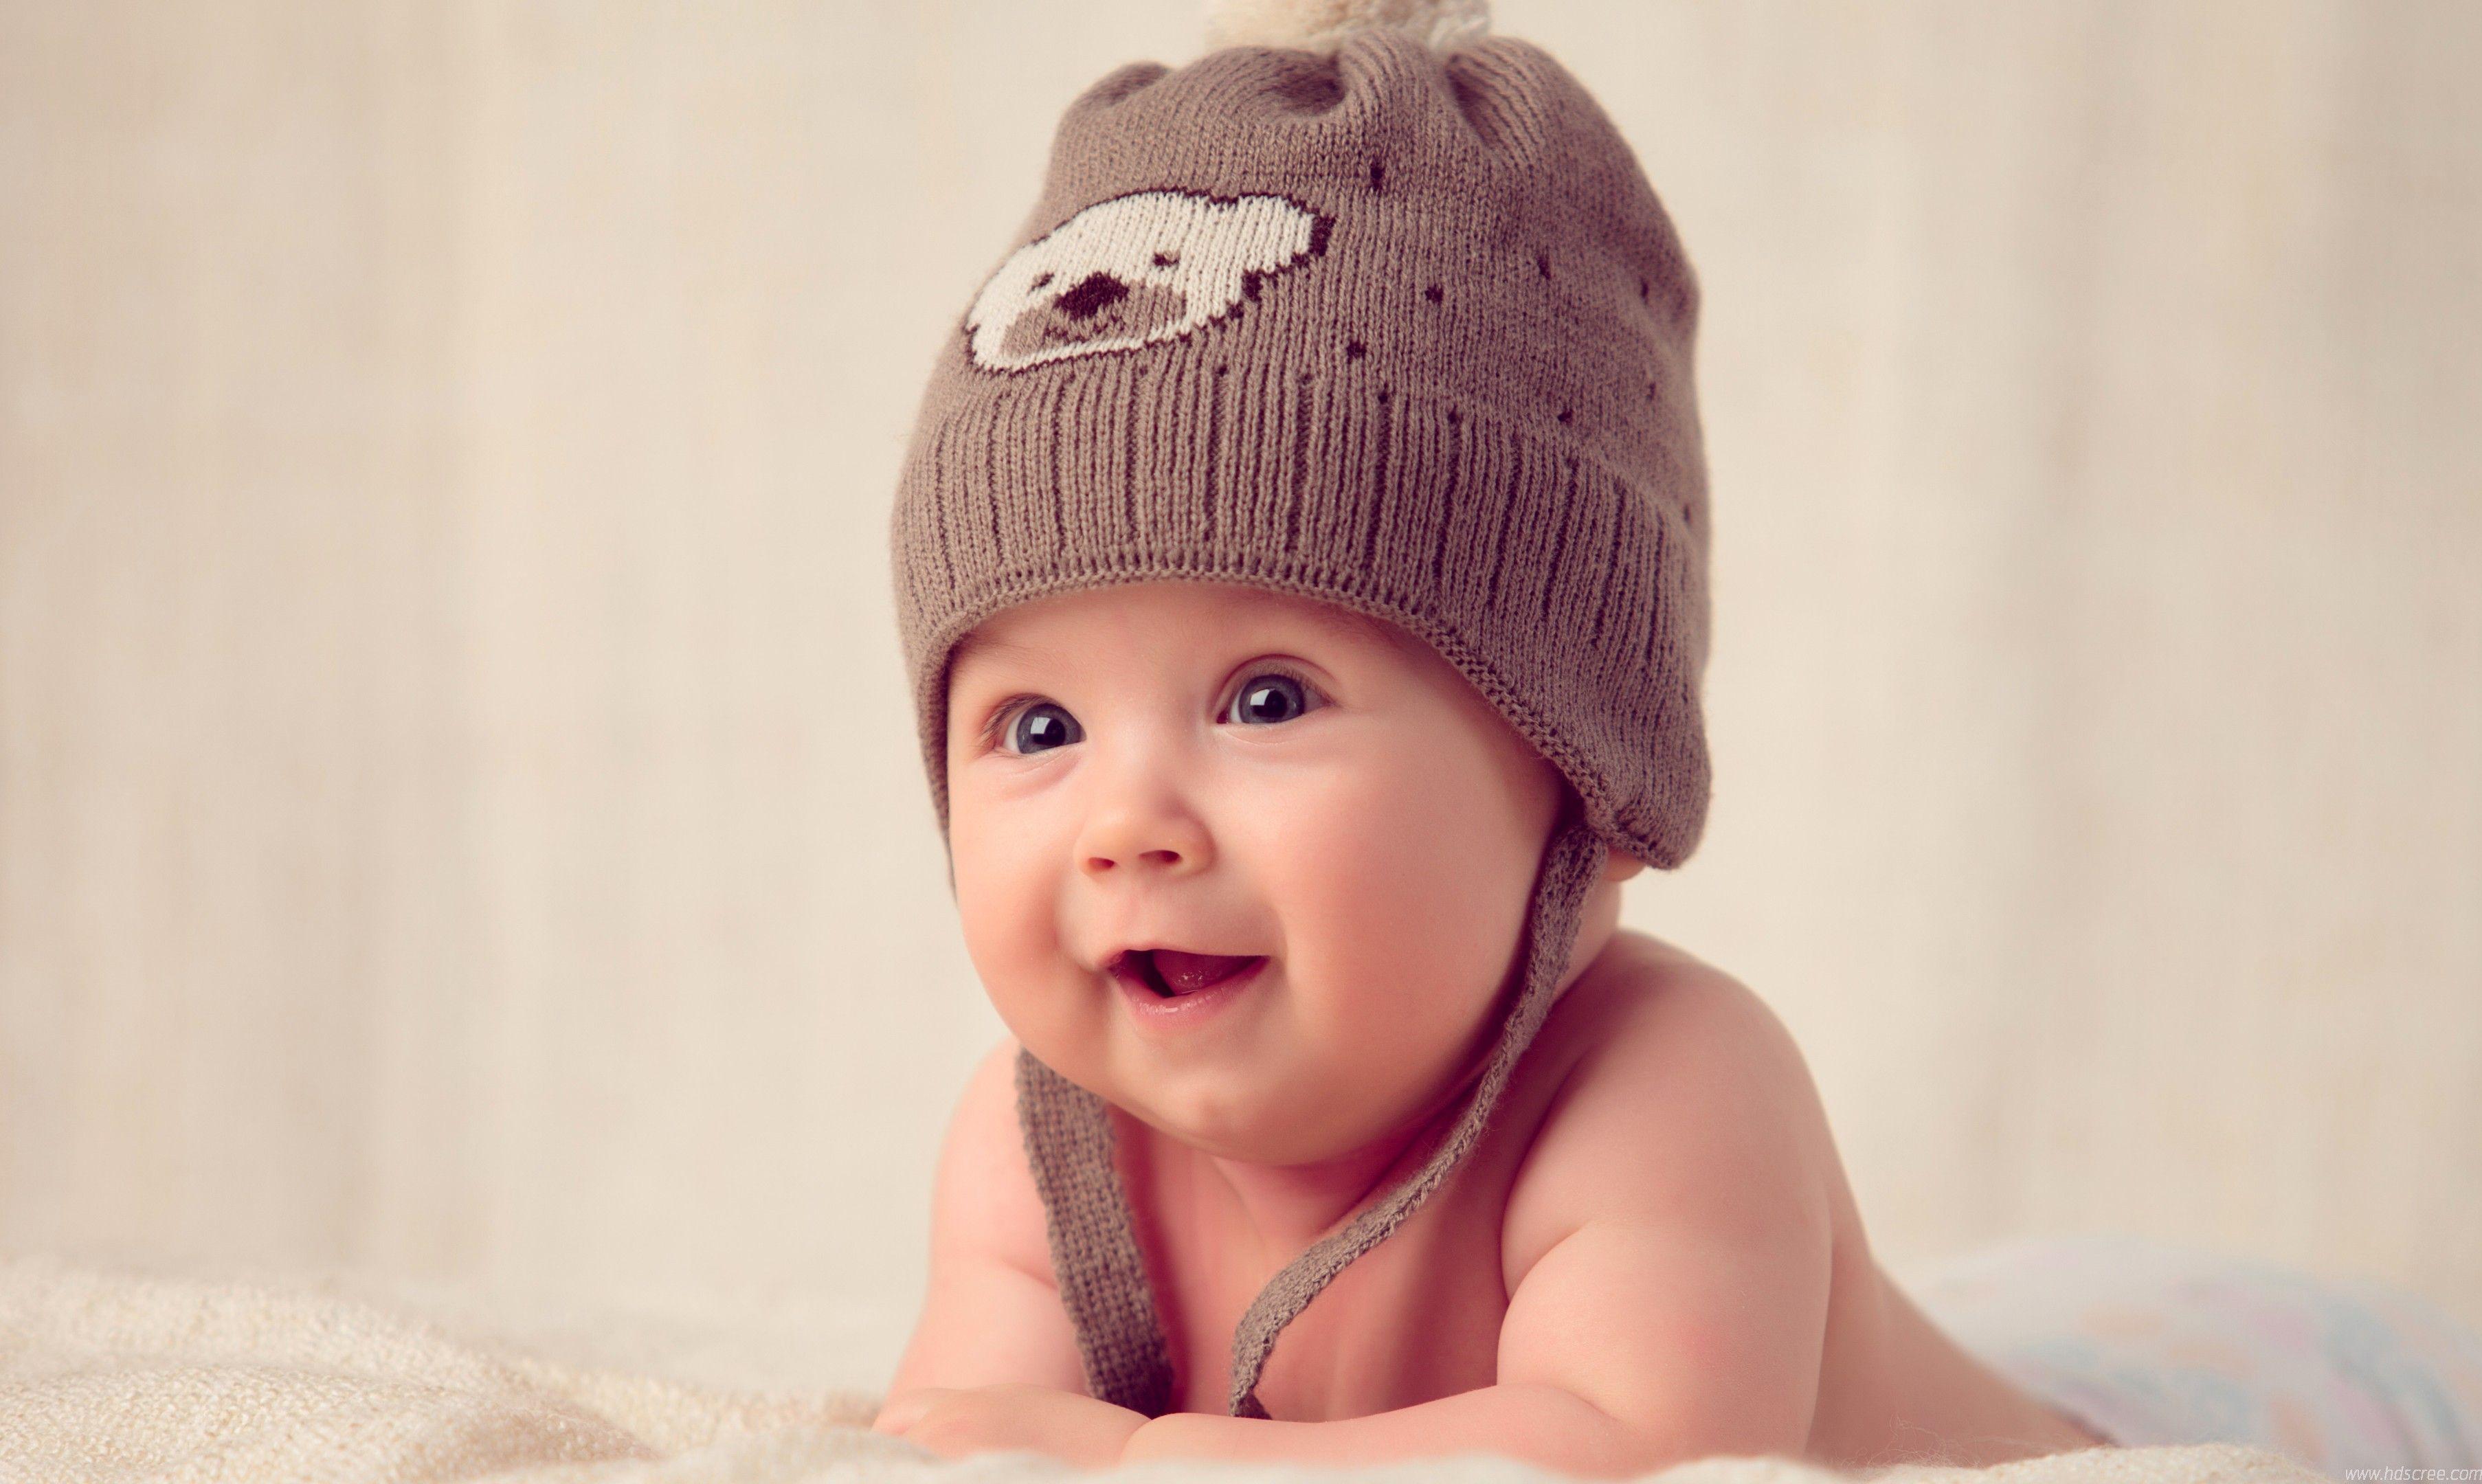 Cute Baby With Hat Cap Boy Wallpaper Background High Quality Of